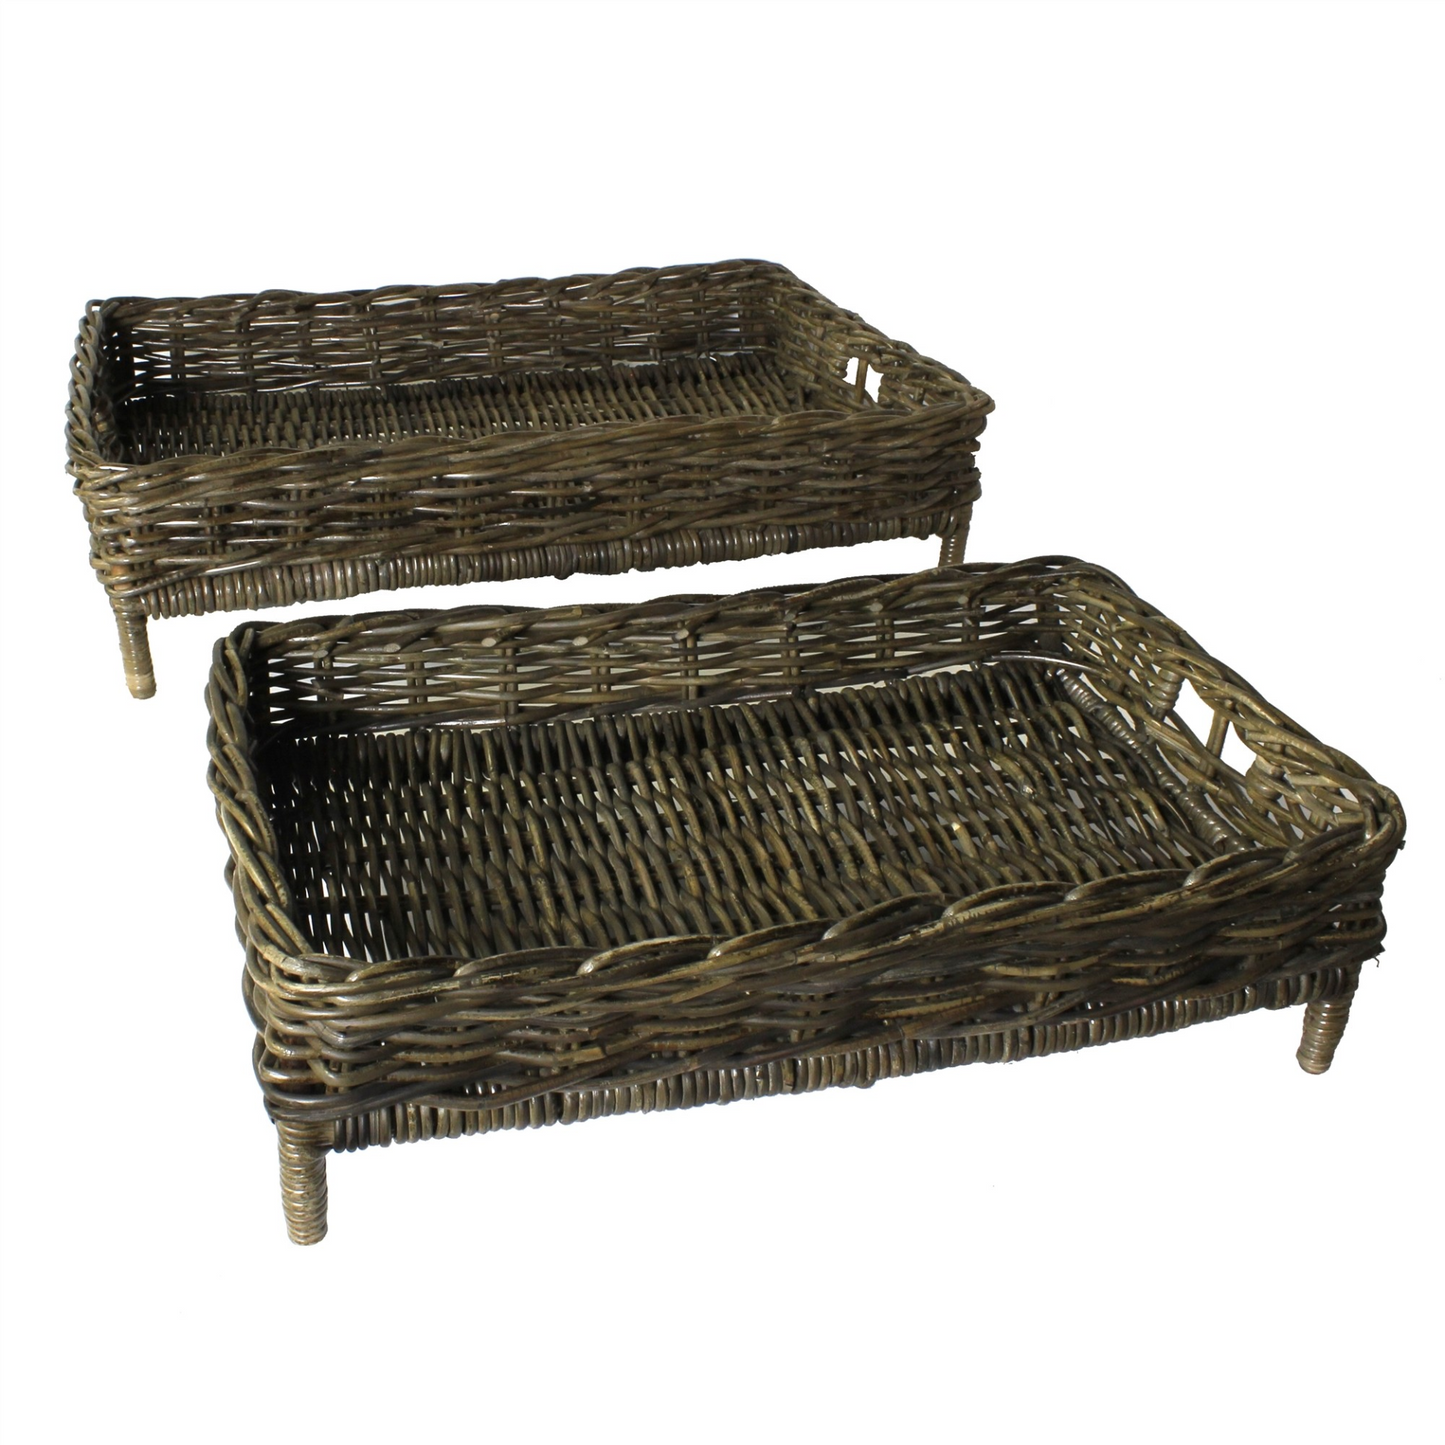 "Set of Two Brown Rattan Trays"